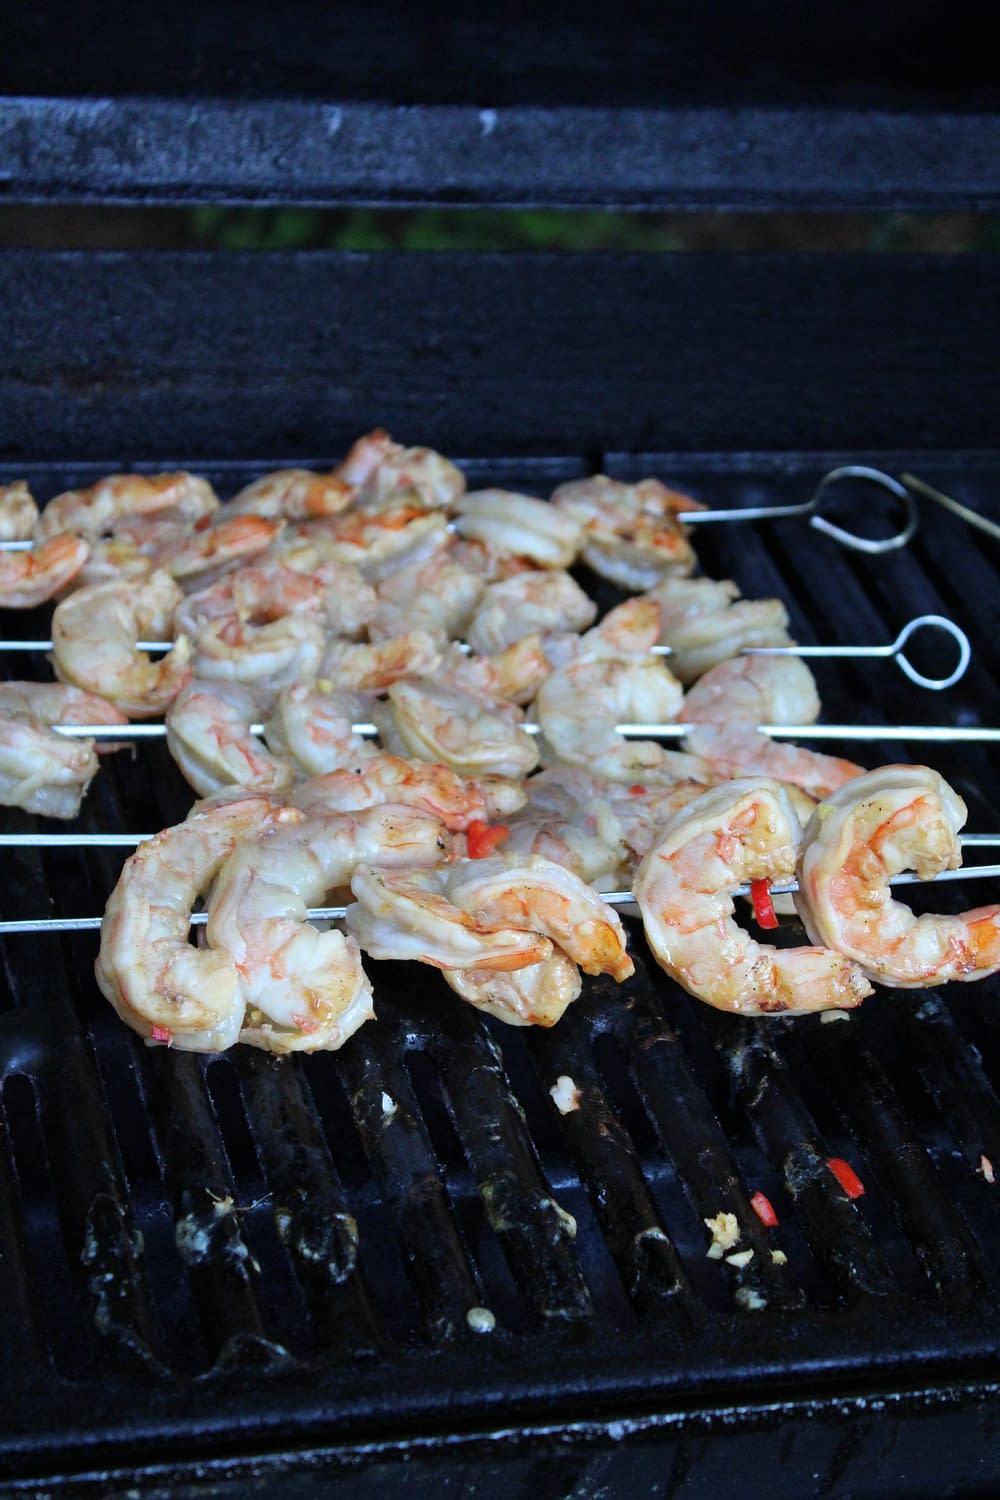 Shrimp grilling on my uncle's grill.